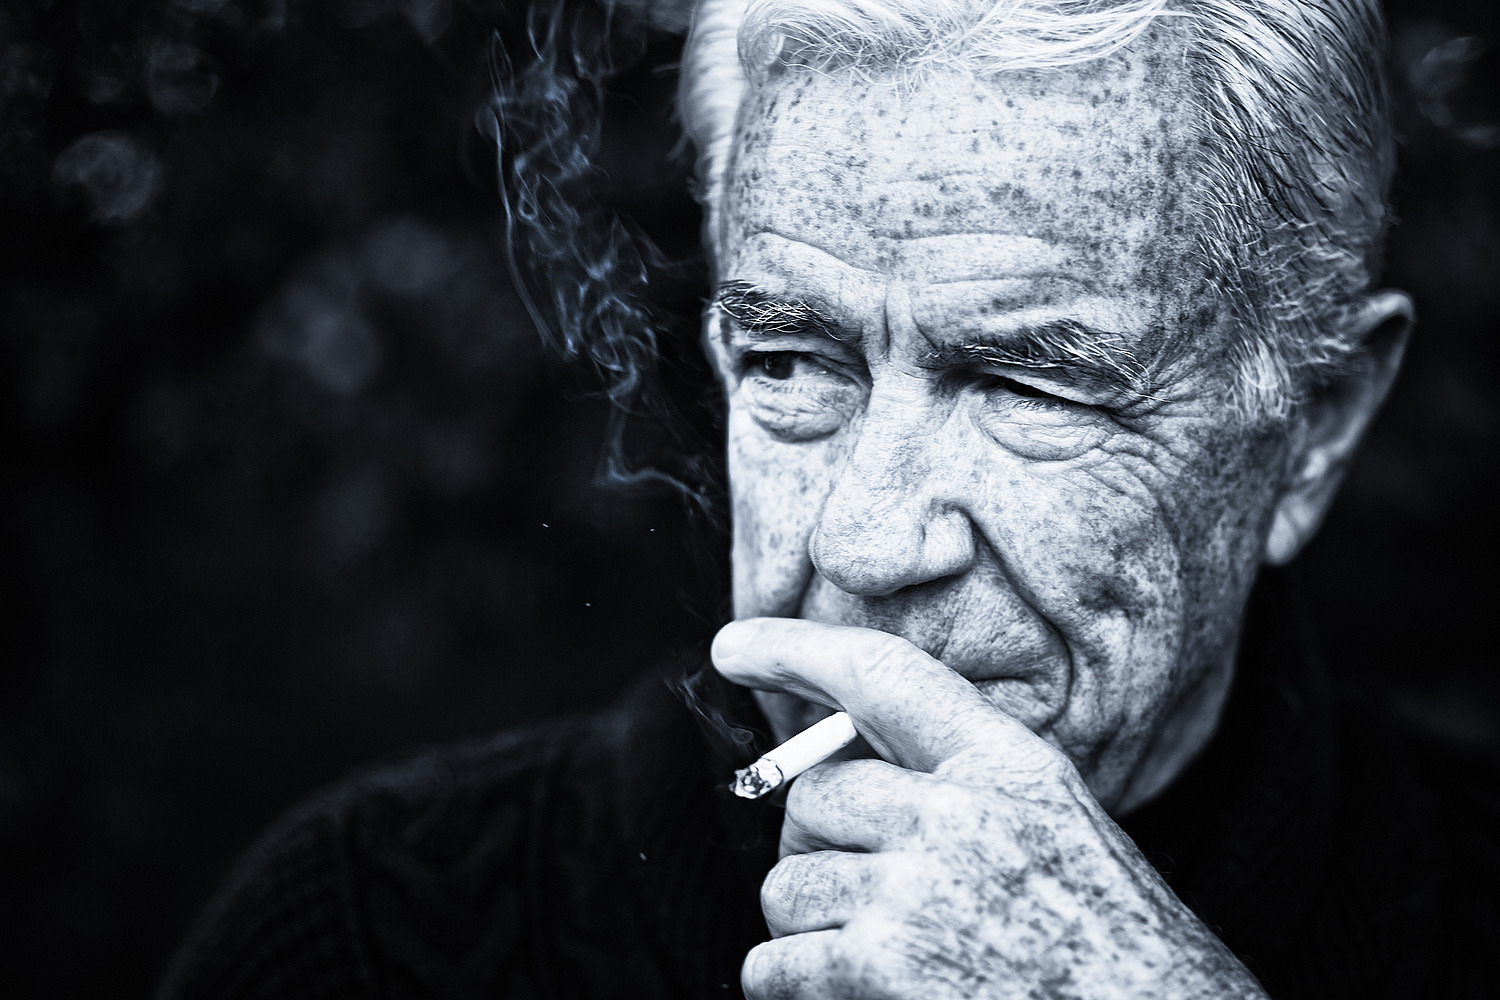 A wrinkled senior man looks sideways as he smokes a cigarette in this monochrome image.